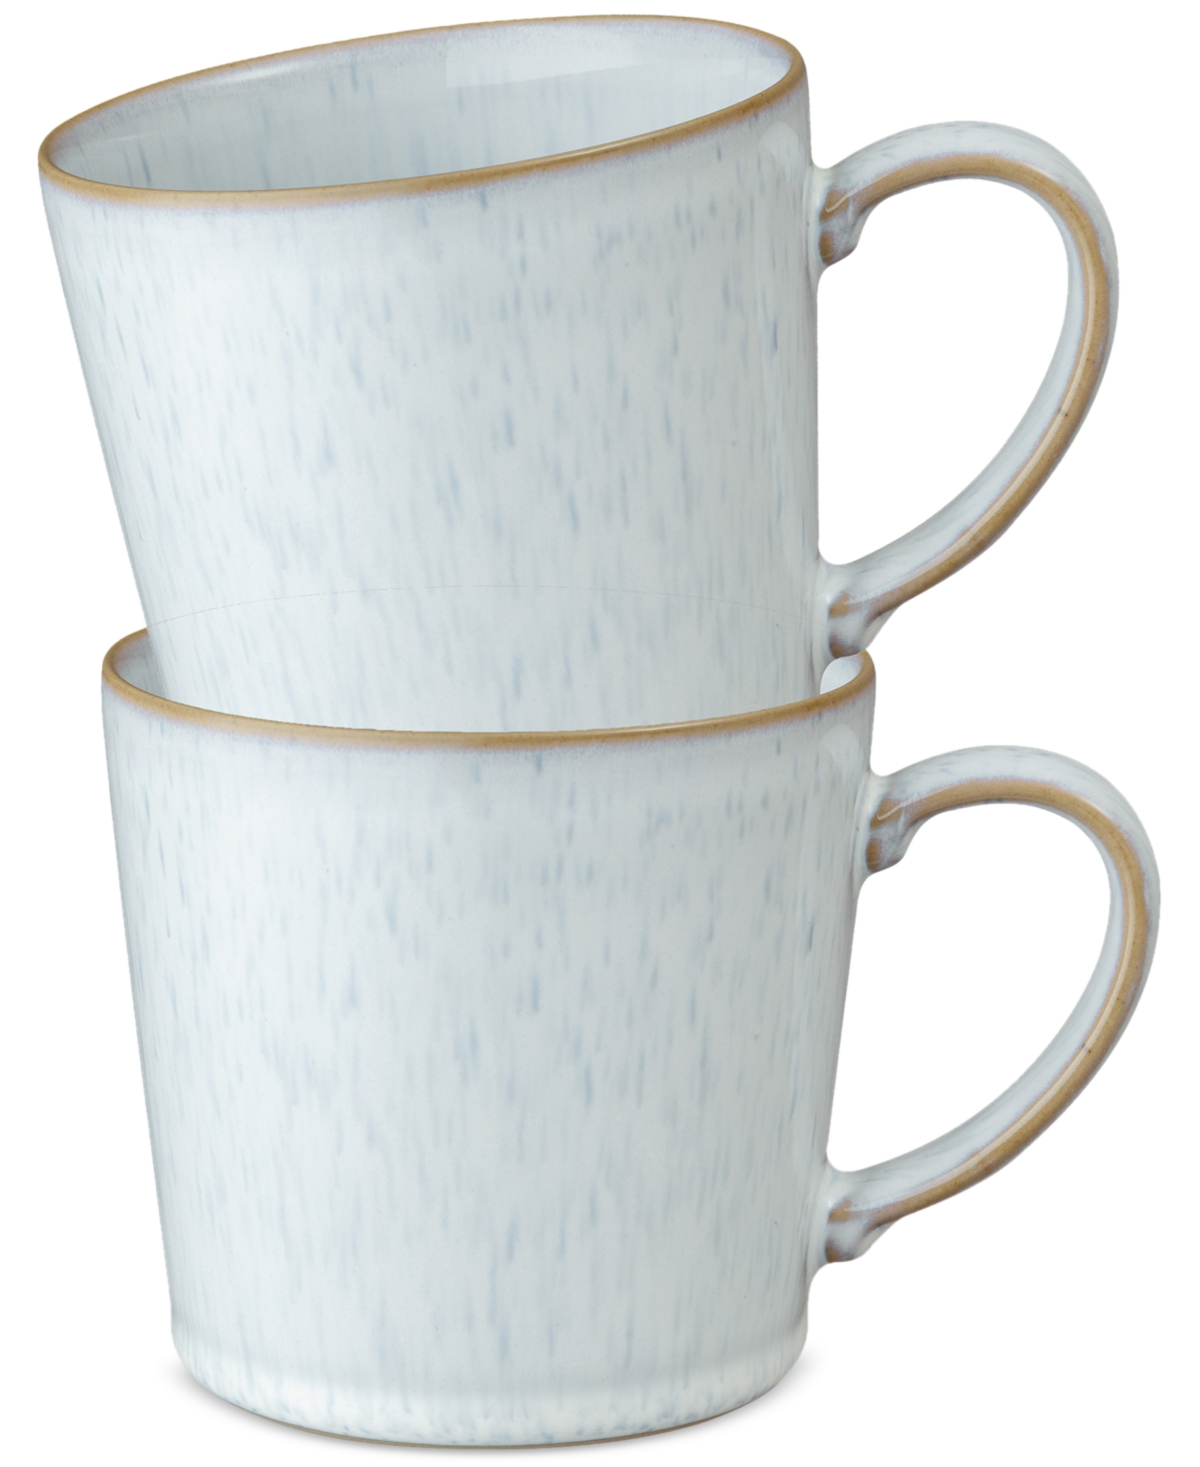 White Speckle Collection Stoneware Mugs, Set of 2 - White